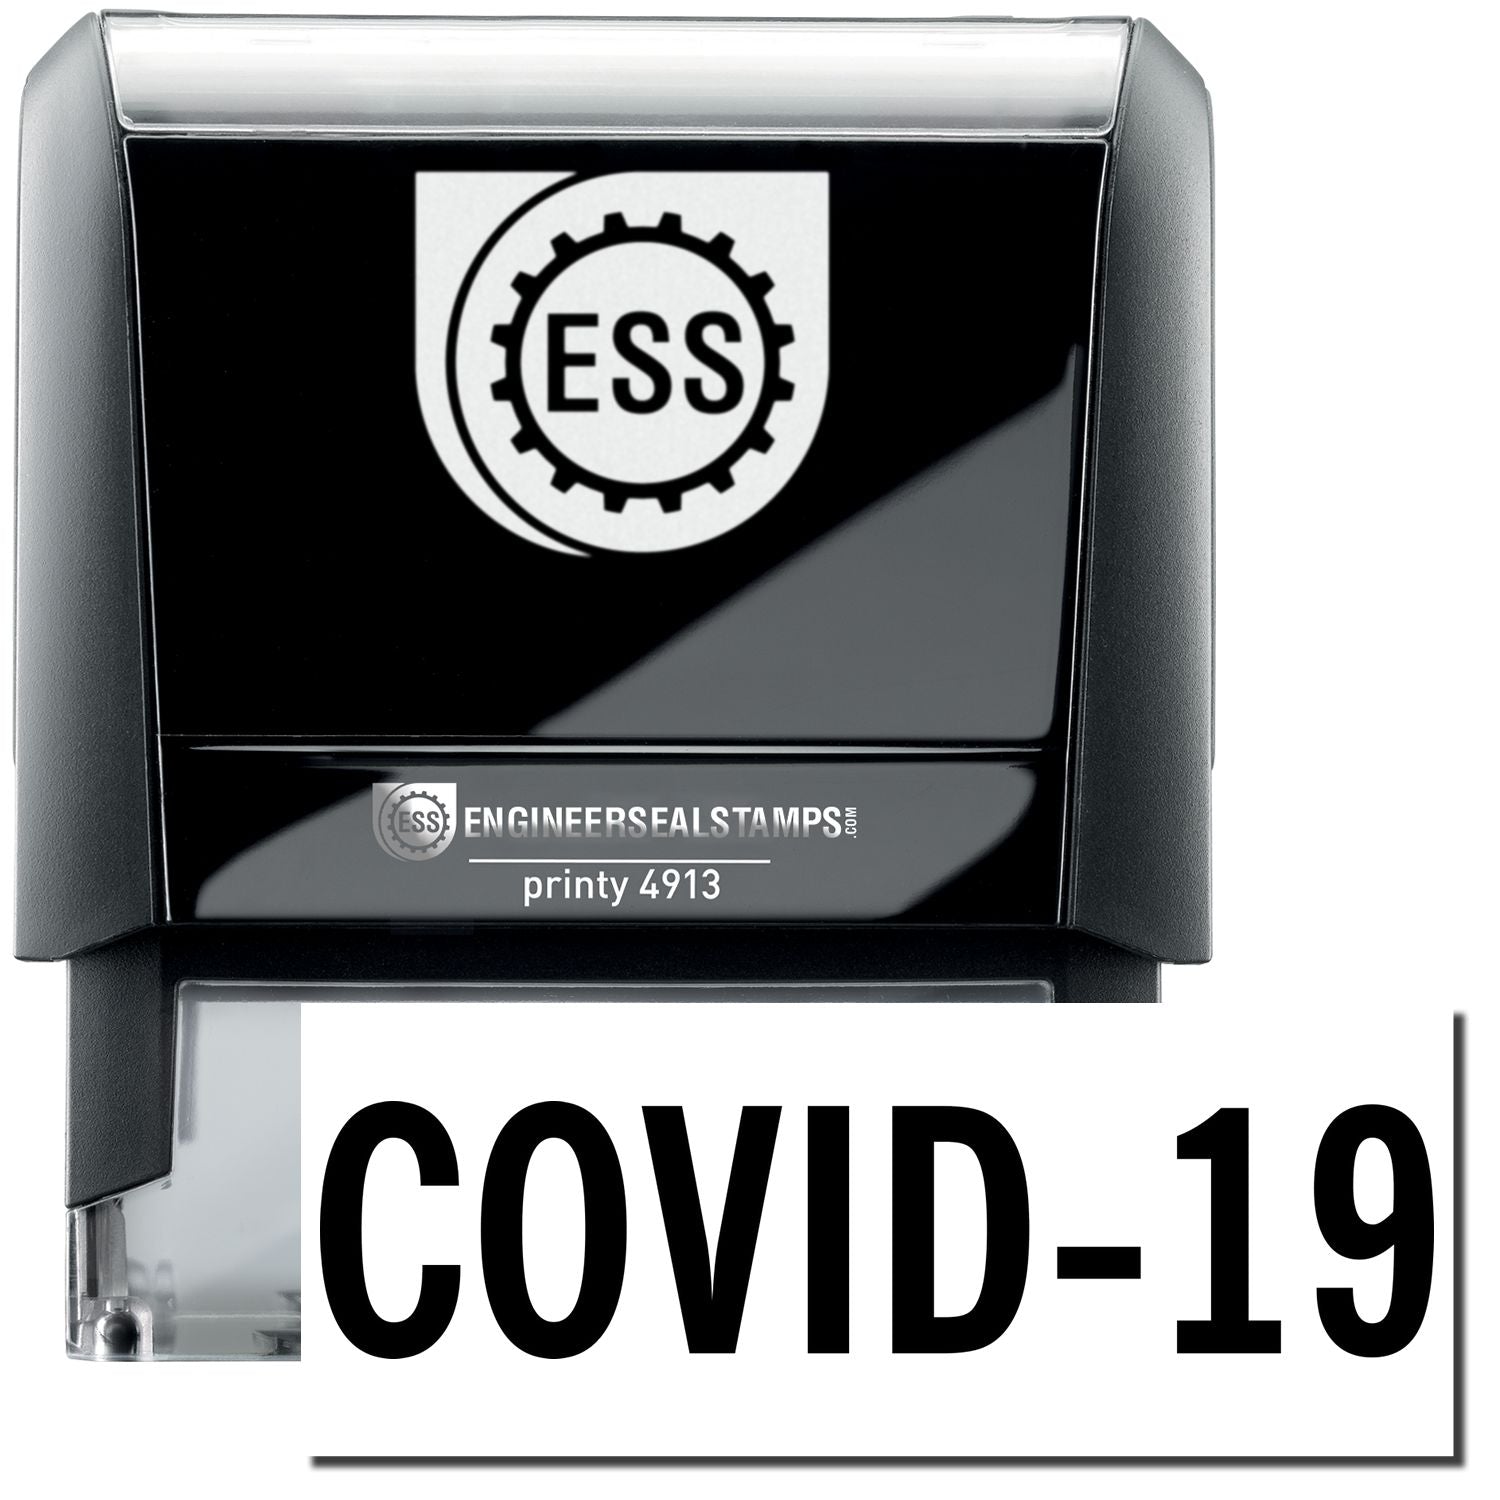 A self-inking stamp with a stamped image showing how the text "COVID-19" in a large bold font is displayed by it after stamping.